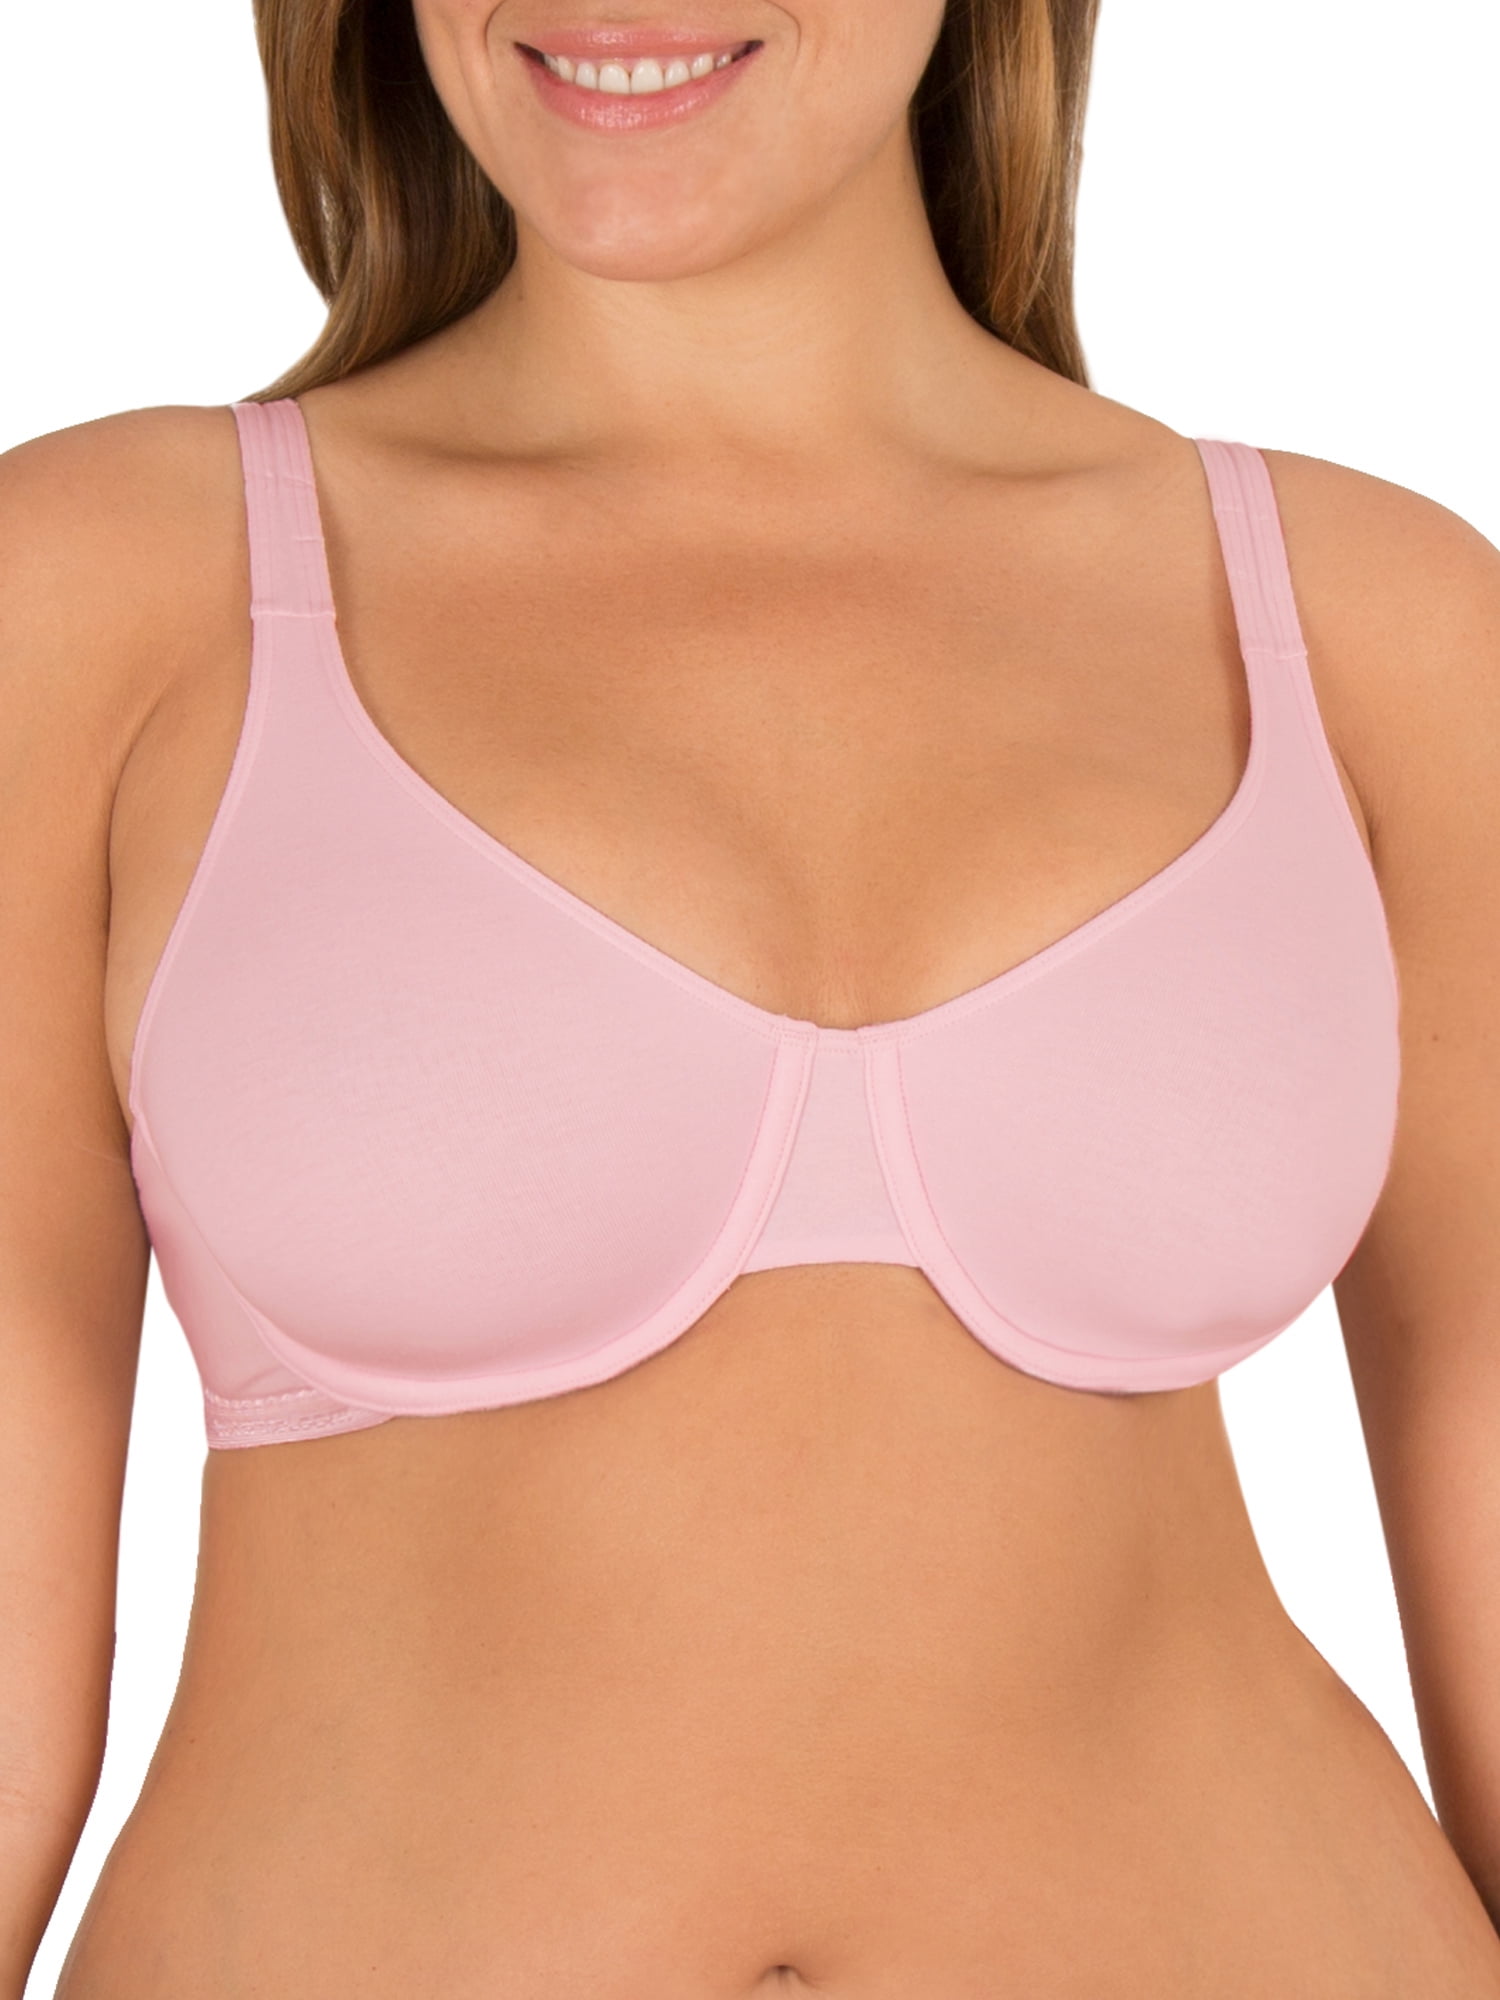 Fruit of the Loom Women's Cotton Stretch Extreme Comfort Underwire Bra,  Style 9292 